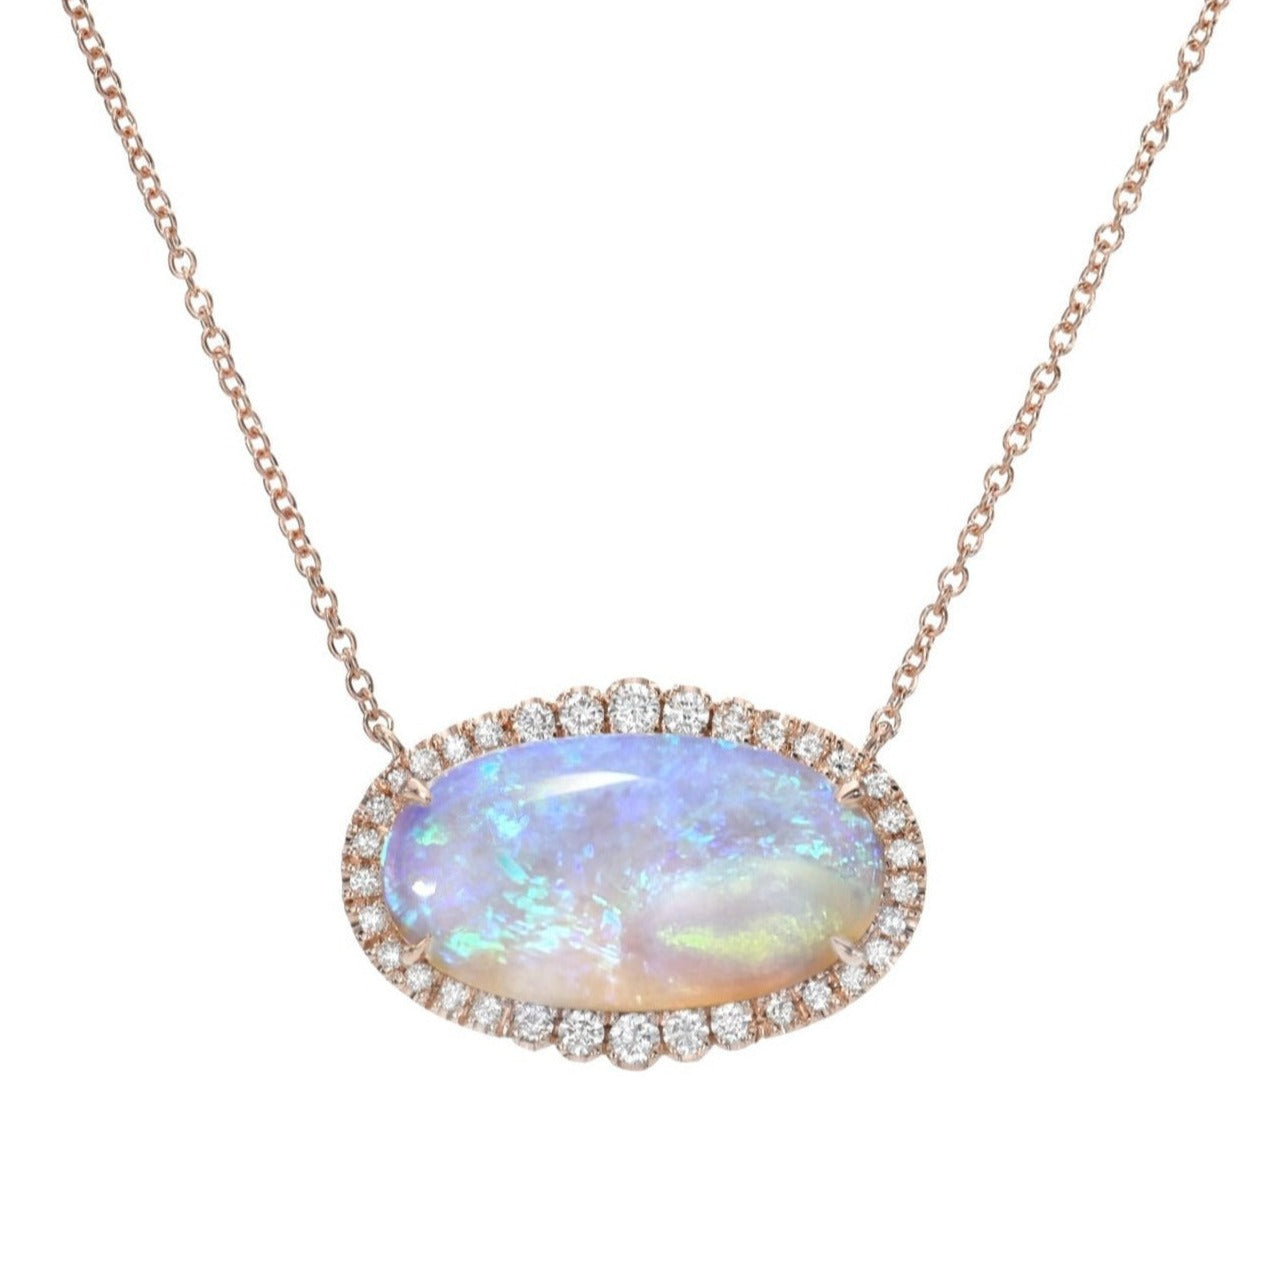  An Australian Opal Necklace by NIXIN Jewelry shot against a white backdrop. An opal and diamond necklace set in 14k rose gold.